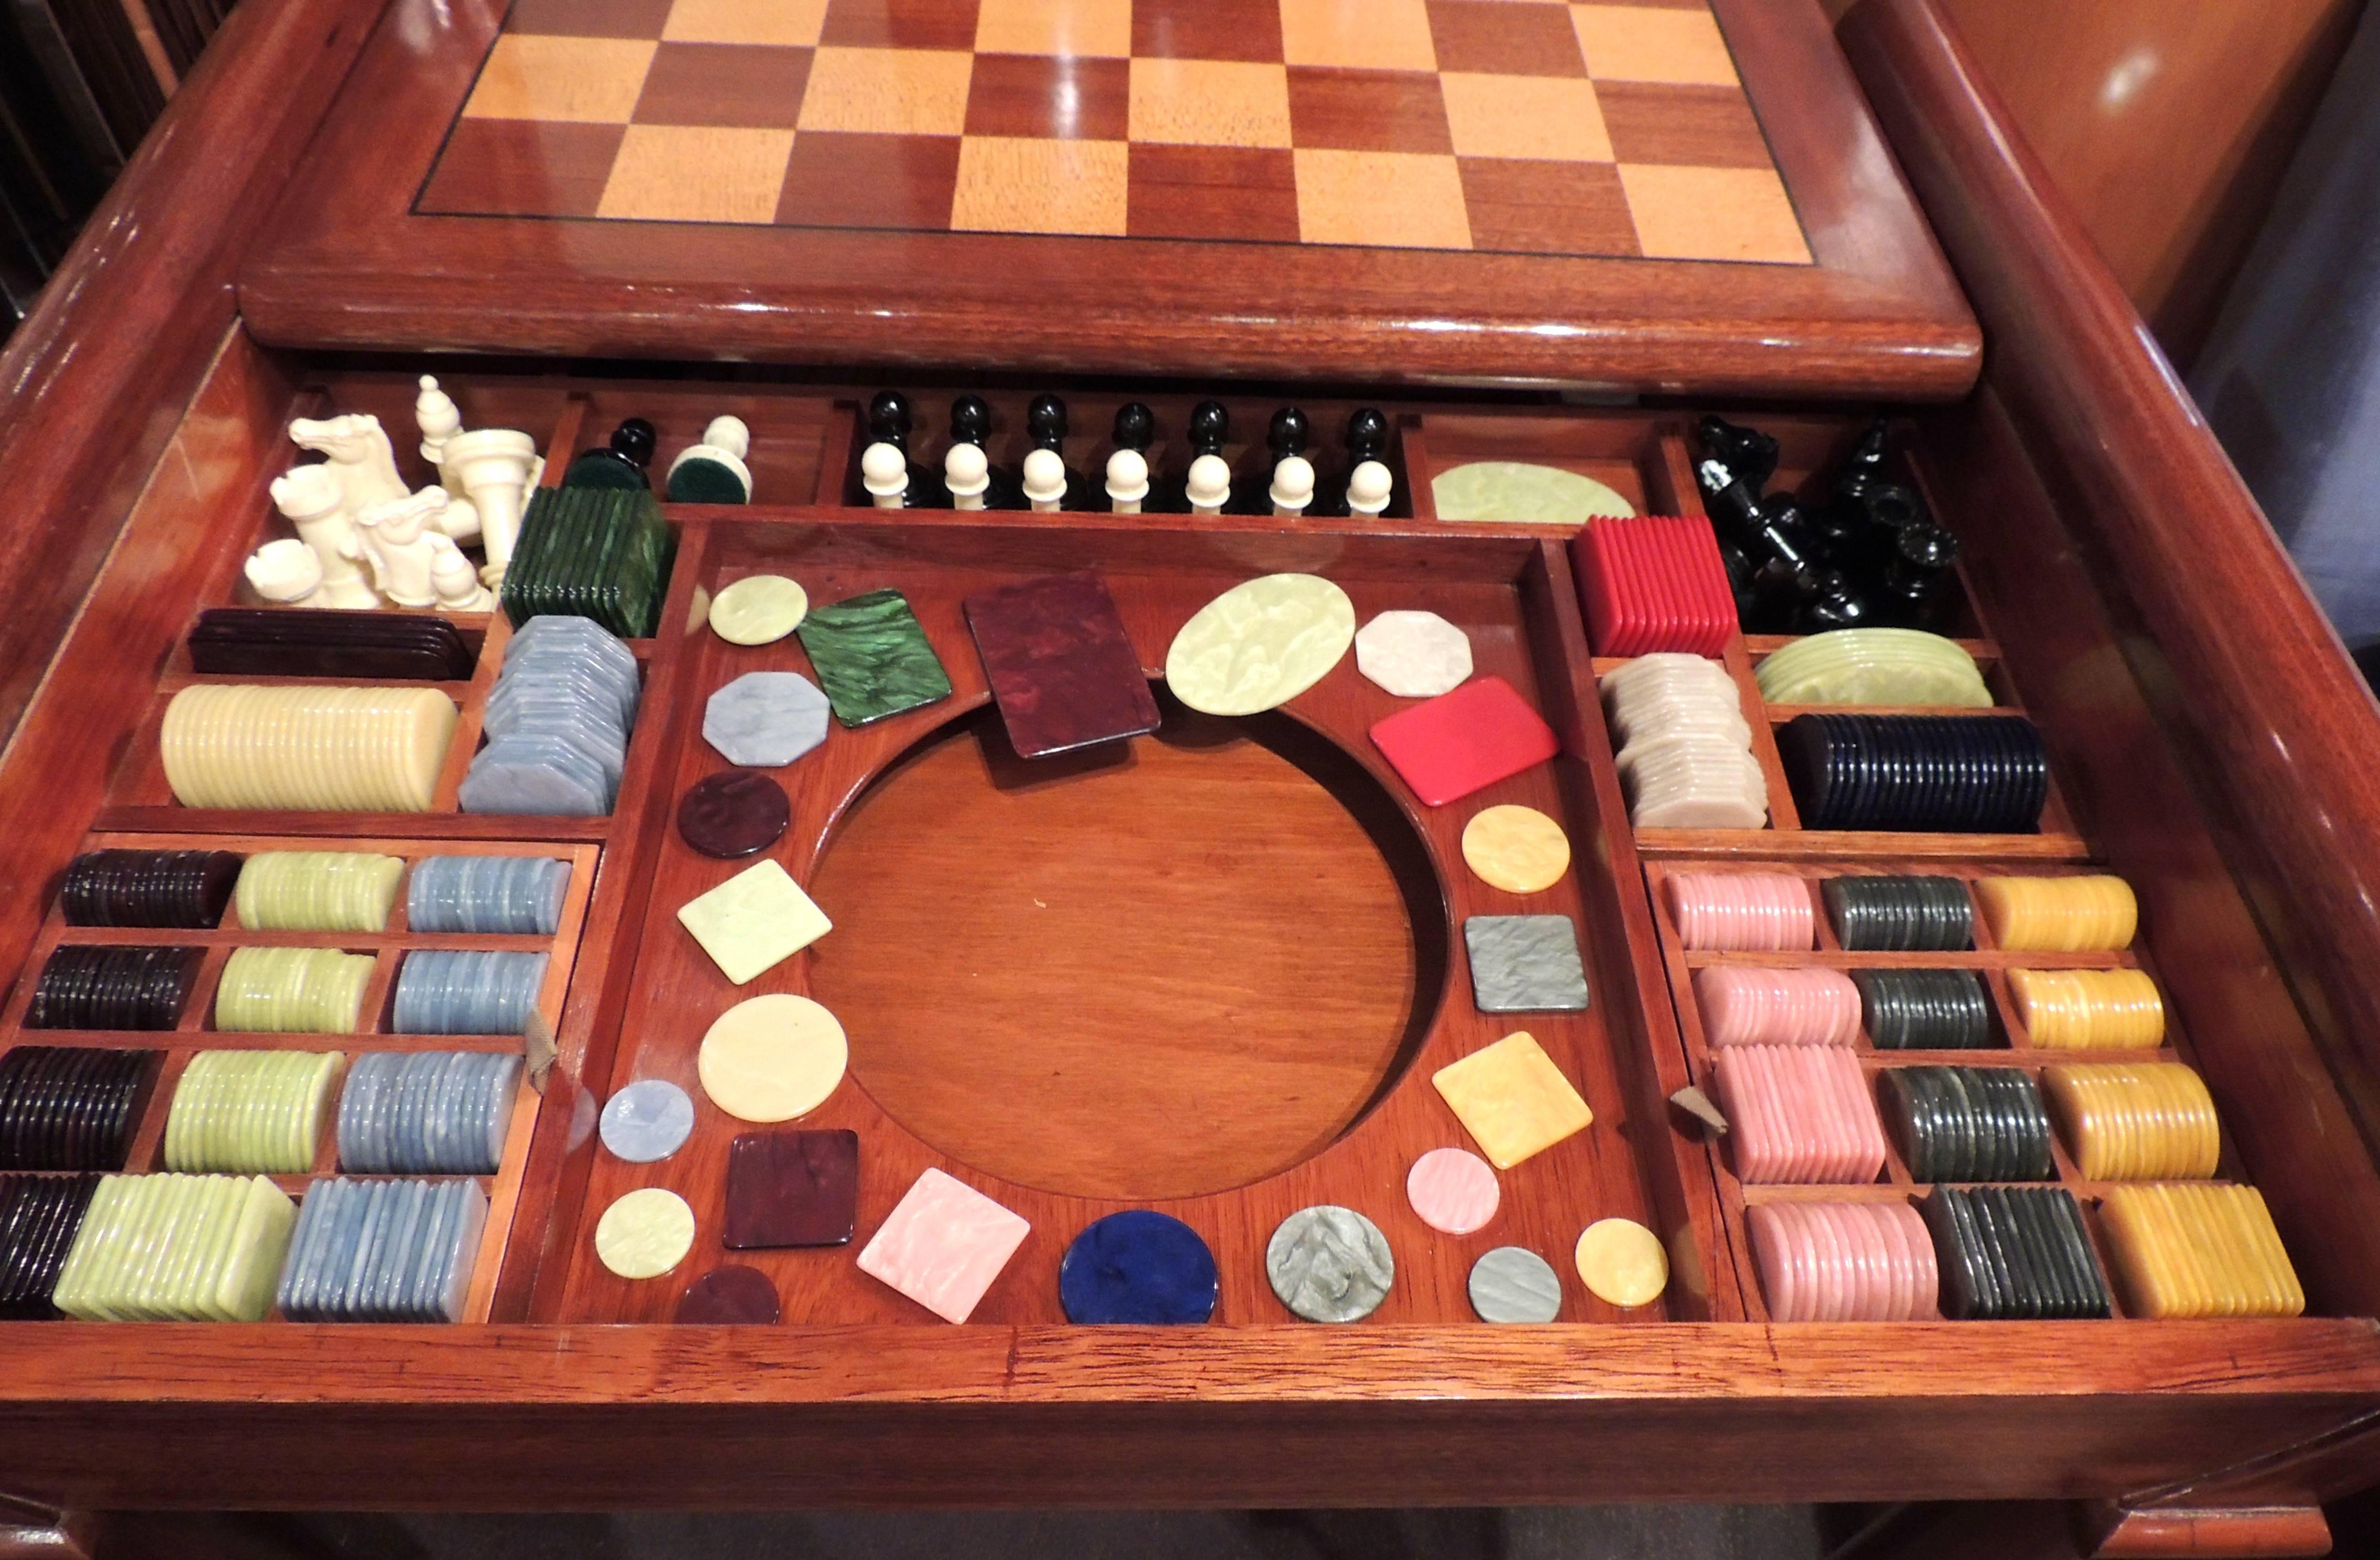 Argentine Art Deco Game Table Complete with Chess, Roulette and More